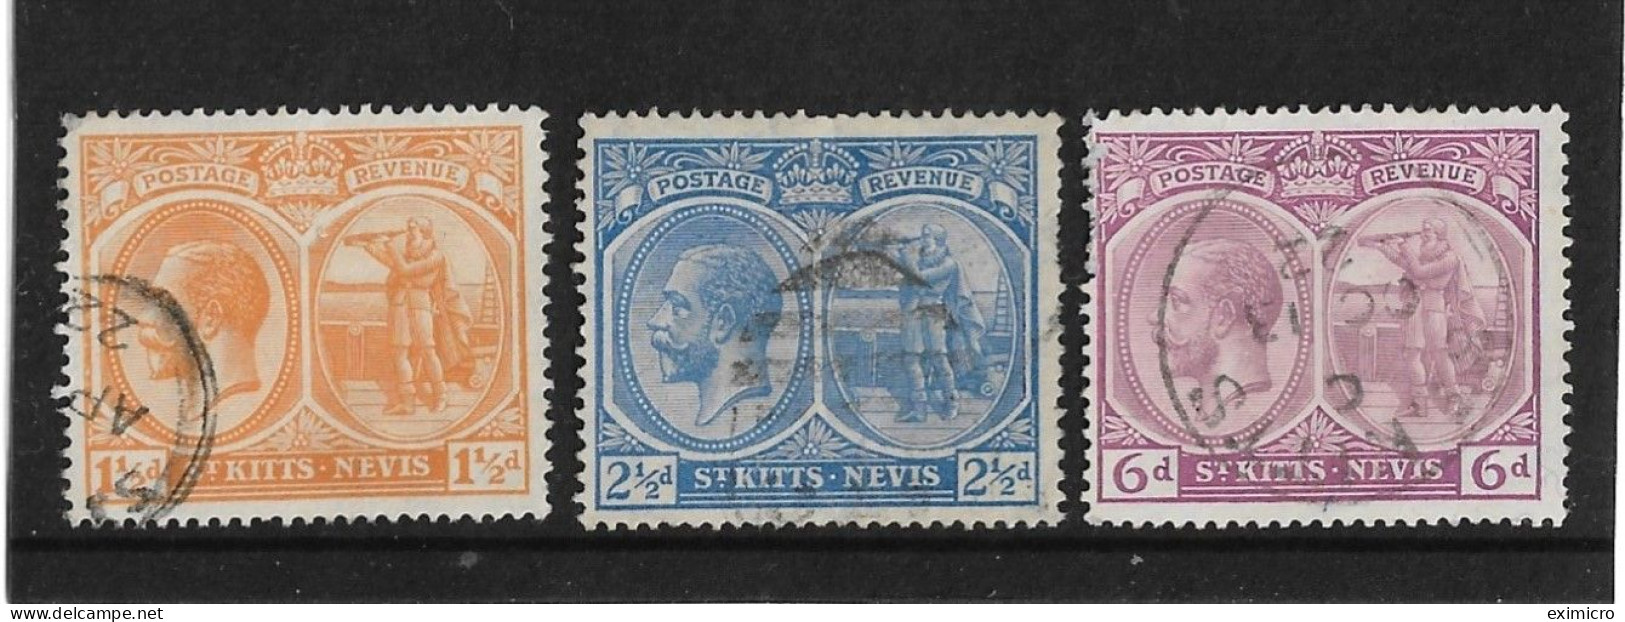 ST. KITTS - NEVIS 1920 - 1922 WATERMARK MULTIPLE CROWN CA 1½d, 2½d, 6d SG 26,28,30 FINE USED Cat £21.75 - St.Christopher-Nevis & Anguilla (...-1980)